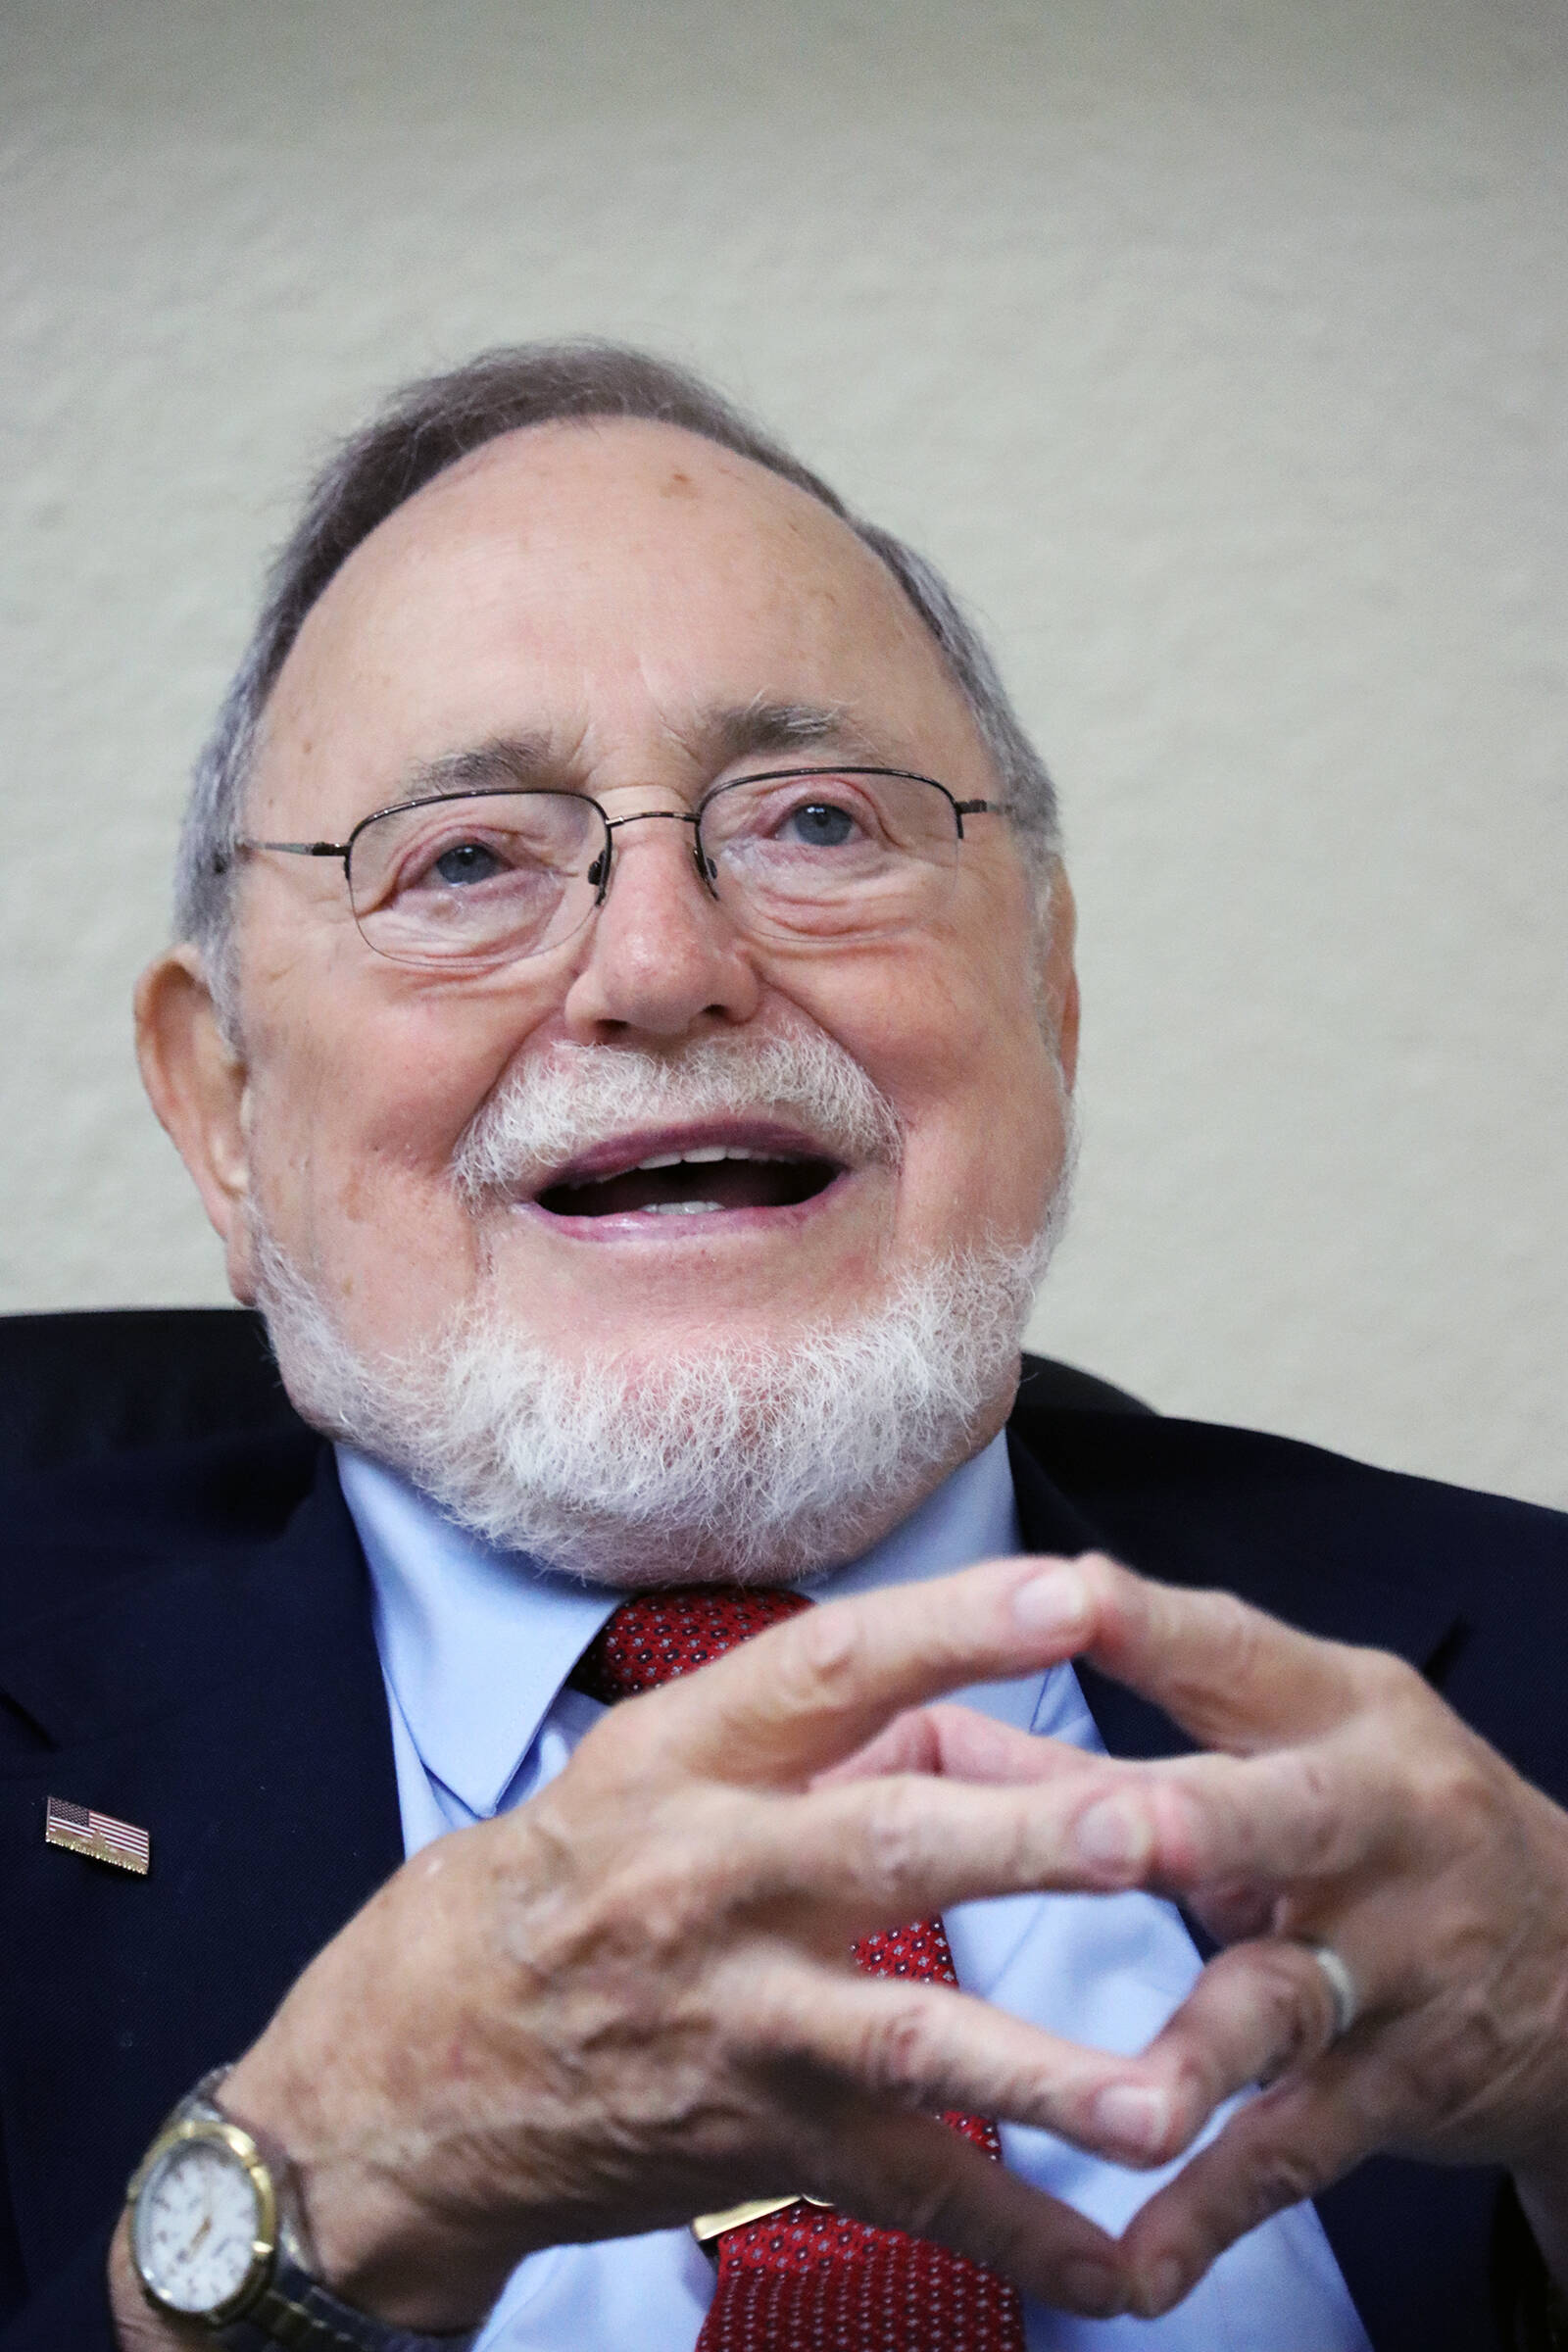 Ben Hohenstatt / Juneau Empire File
Rep. Don Young smiles during a sit-down in the Juneau Empire’s offices last June. Young died on Friday, according to the longtime U.S. representative’s office.